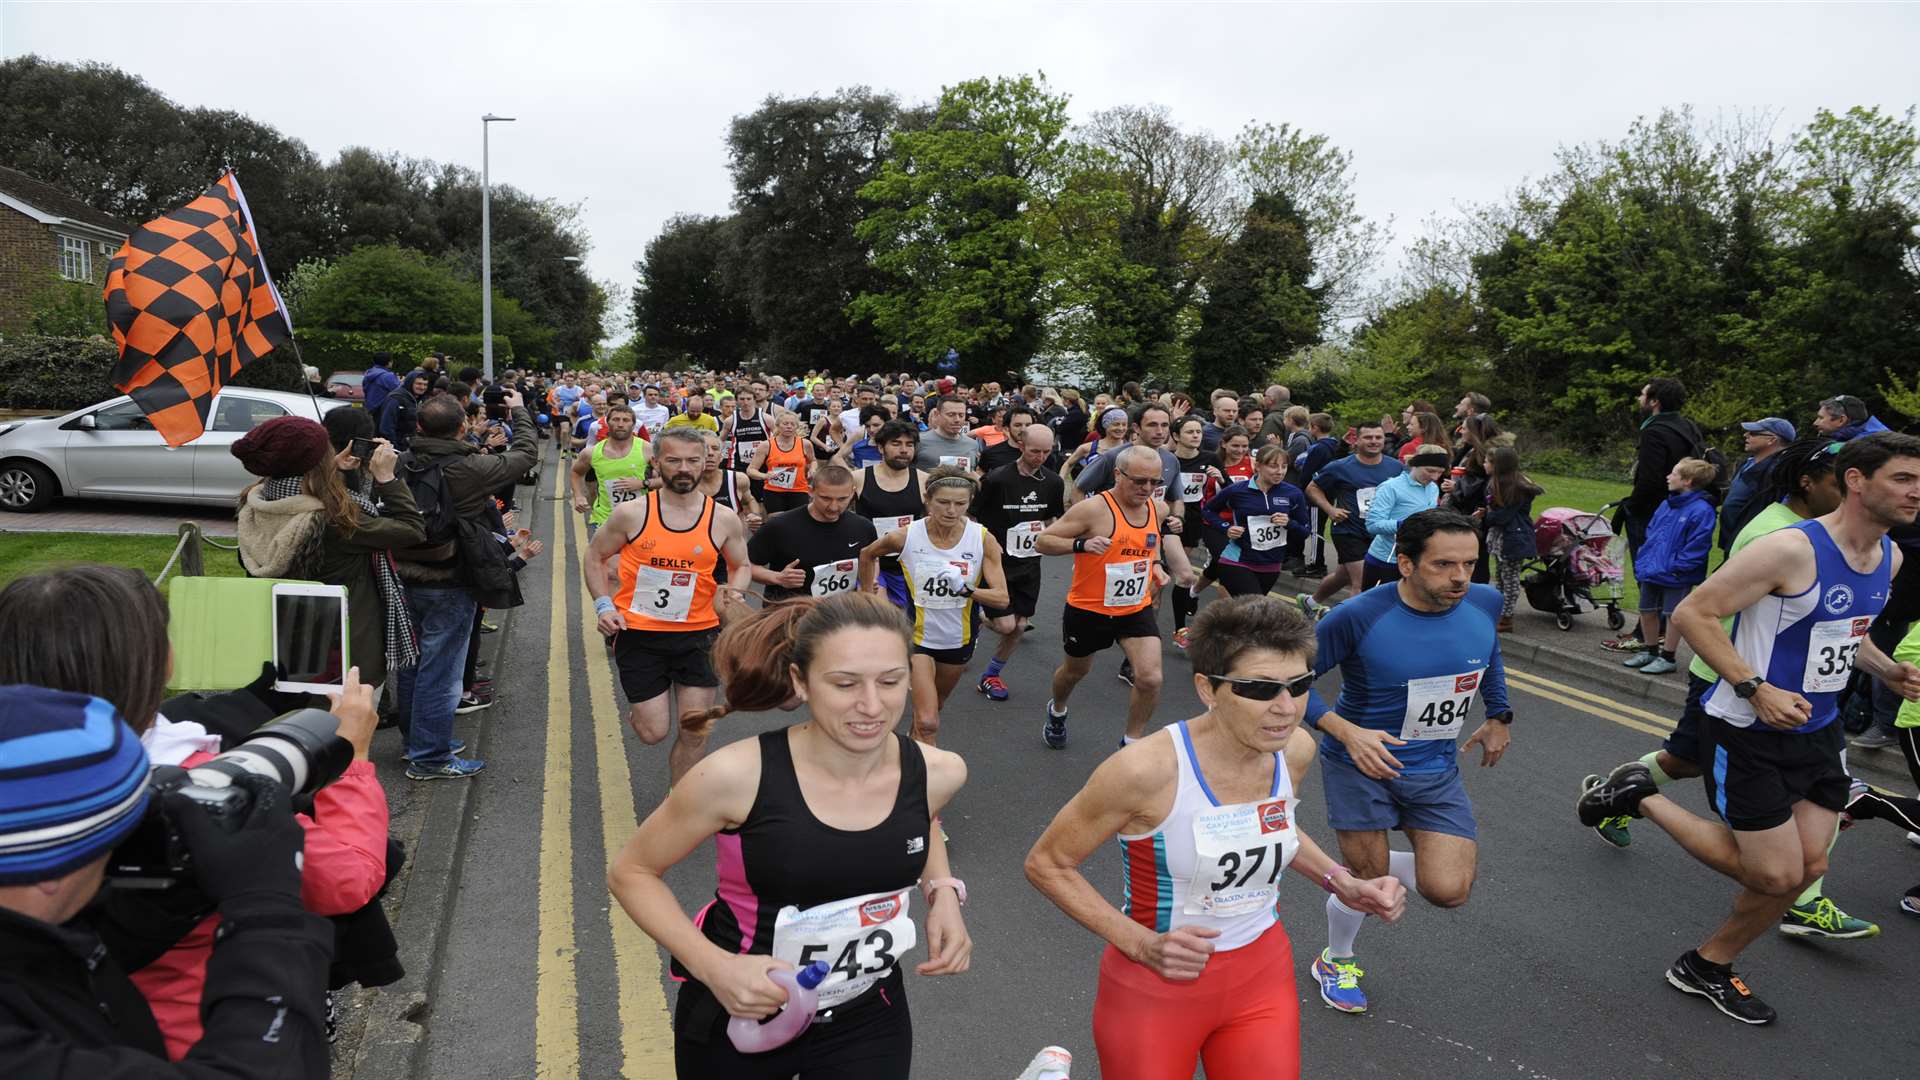 Runners taking part in this year's race in Whitstable